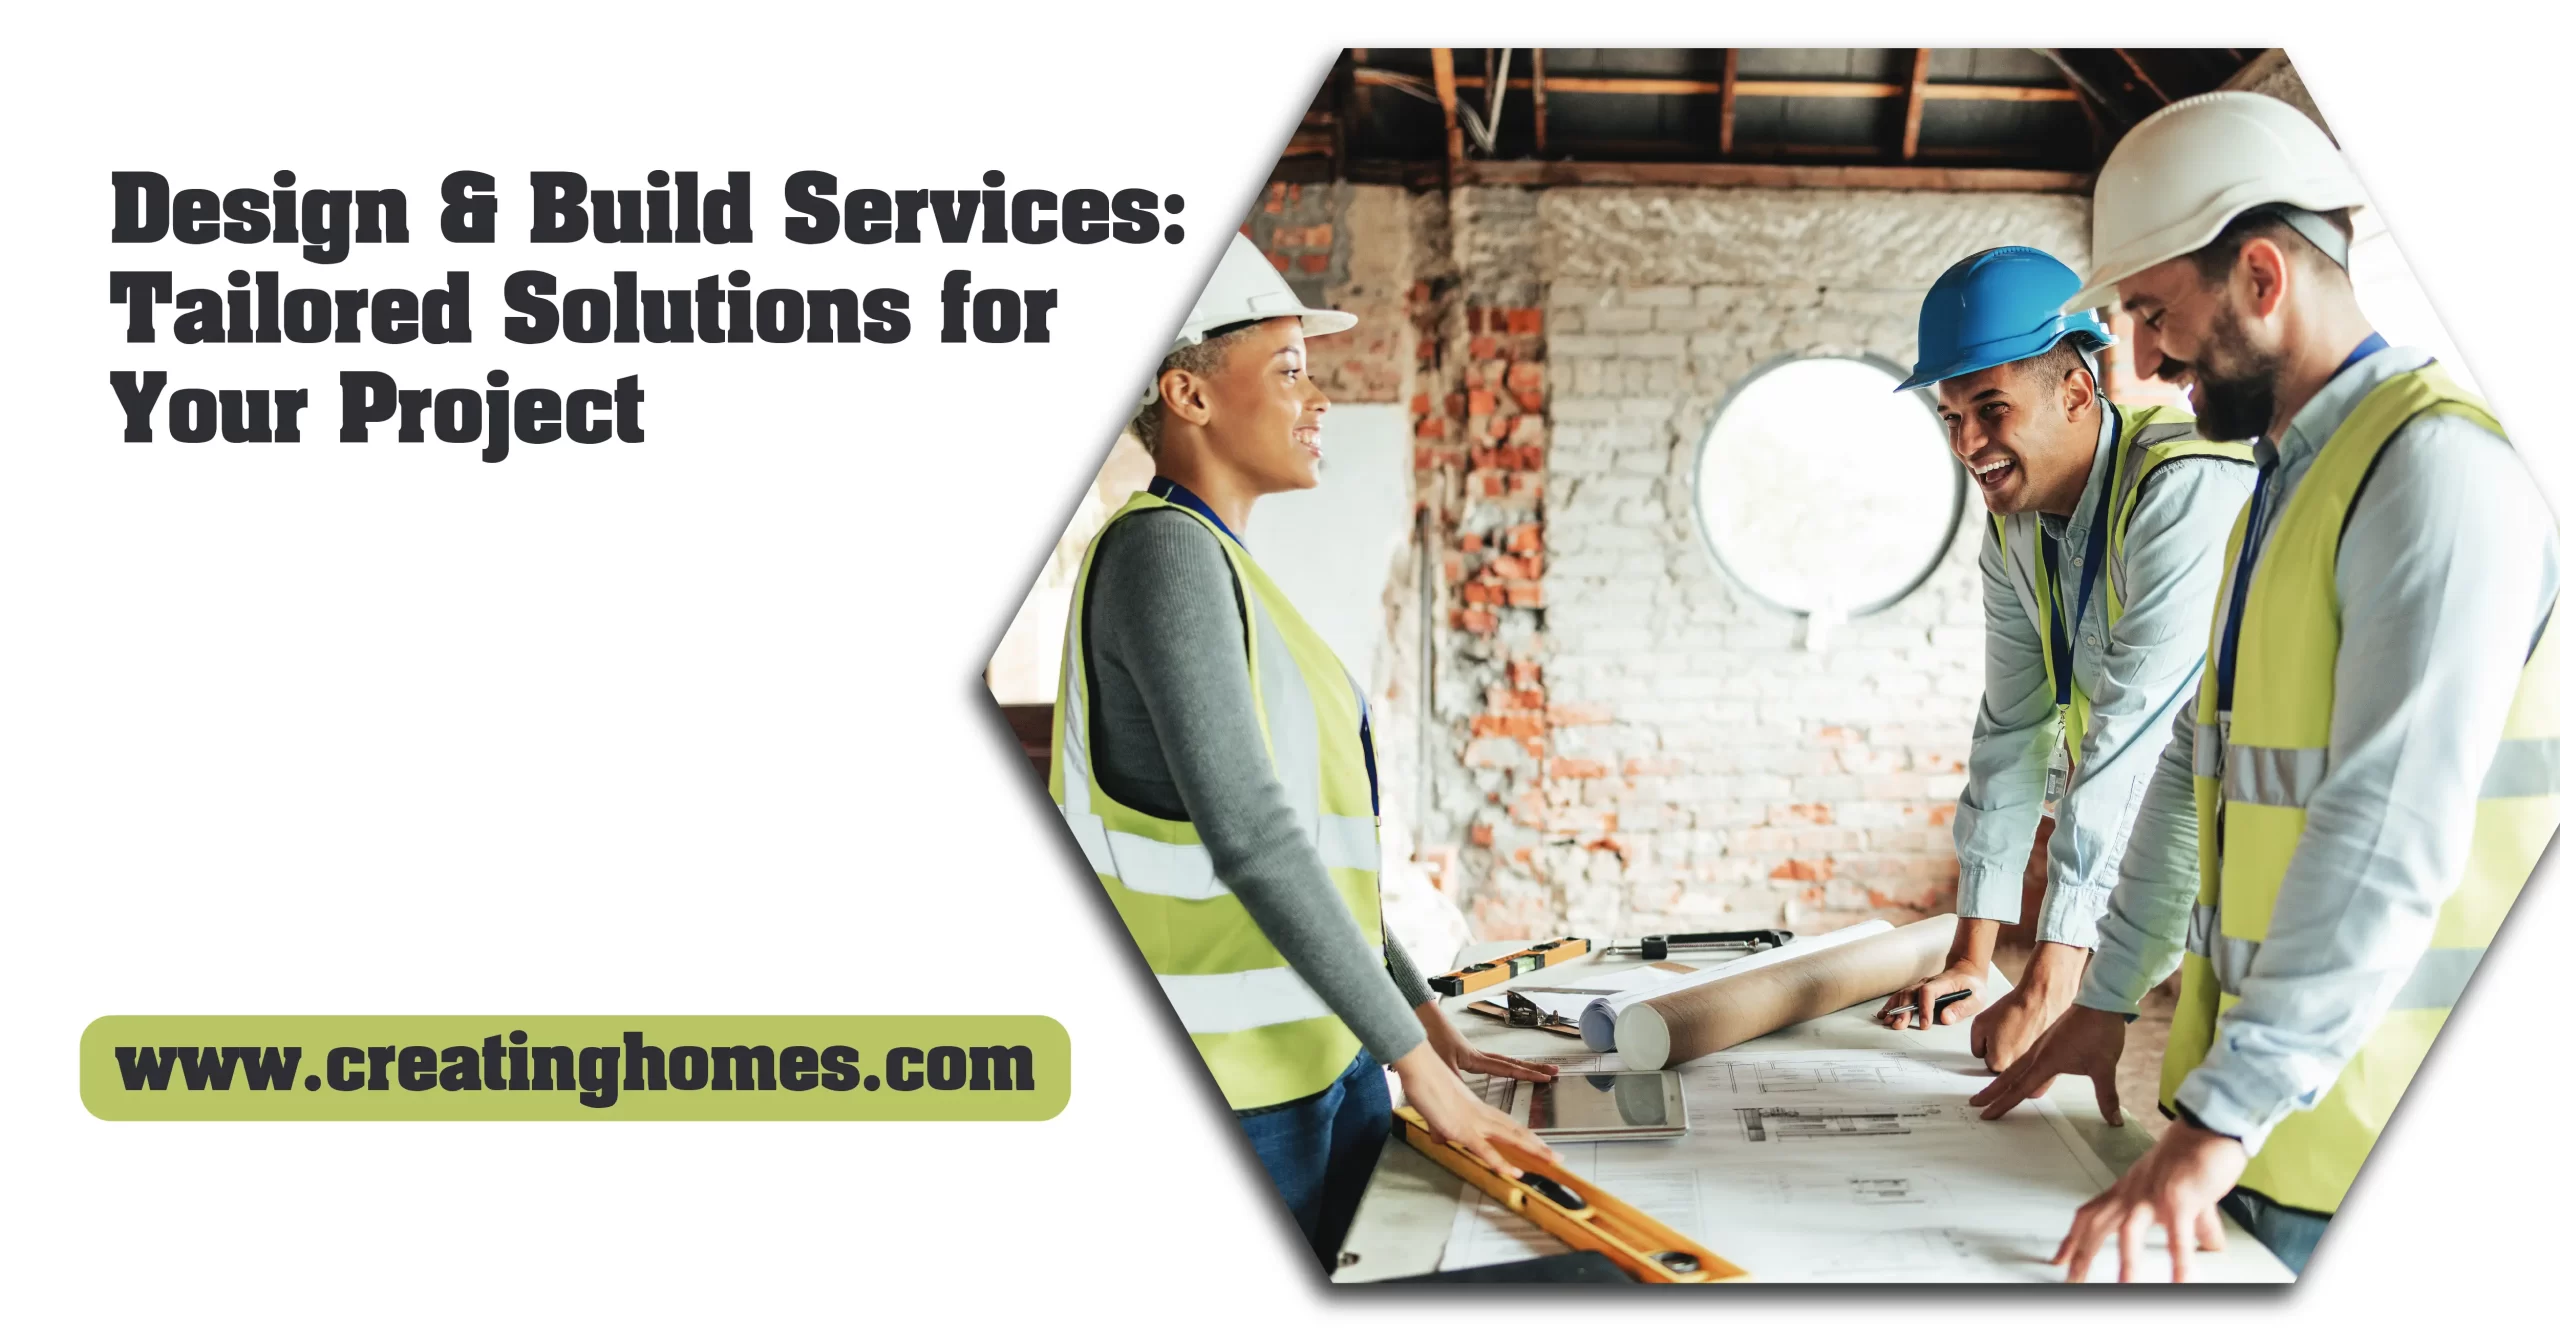 Sustainable Design & Build Service: Solutions for Your Project